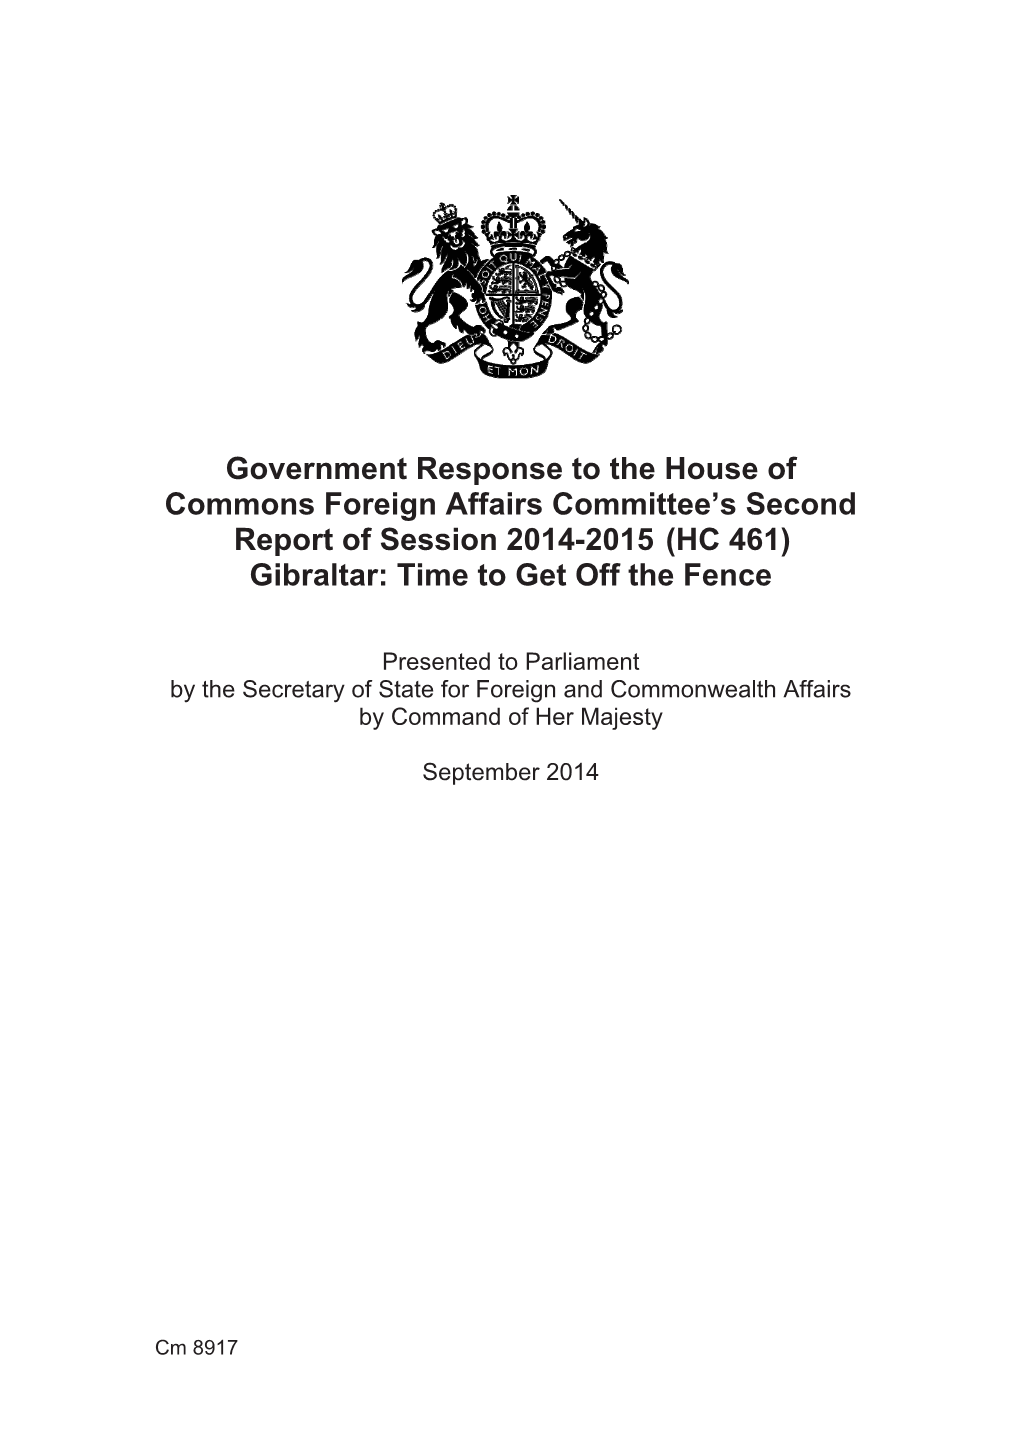 CM 8917 Government Response to the House of Commons Foreign Affairs Committee